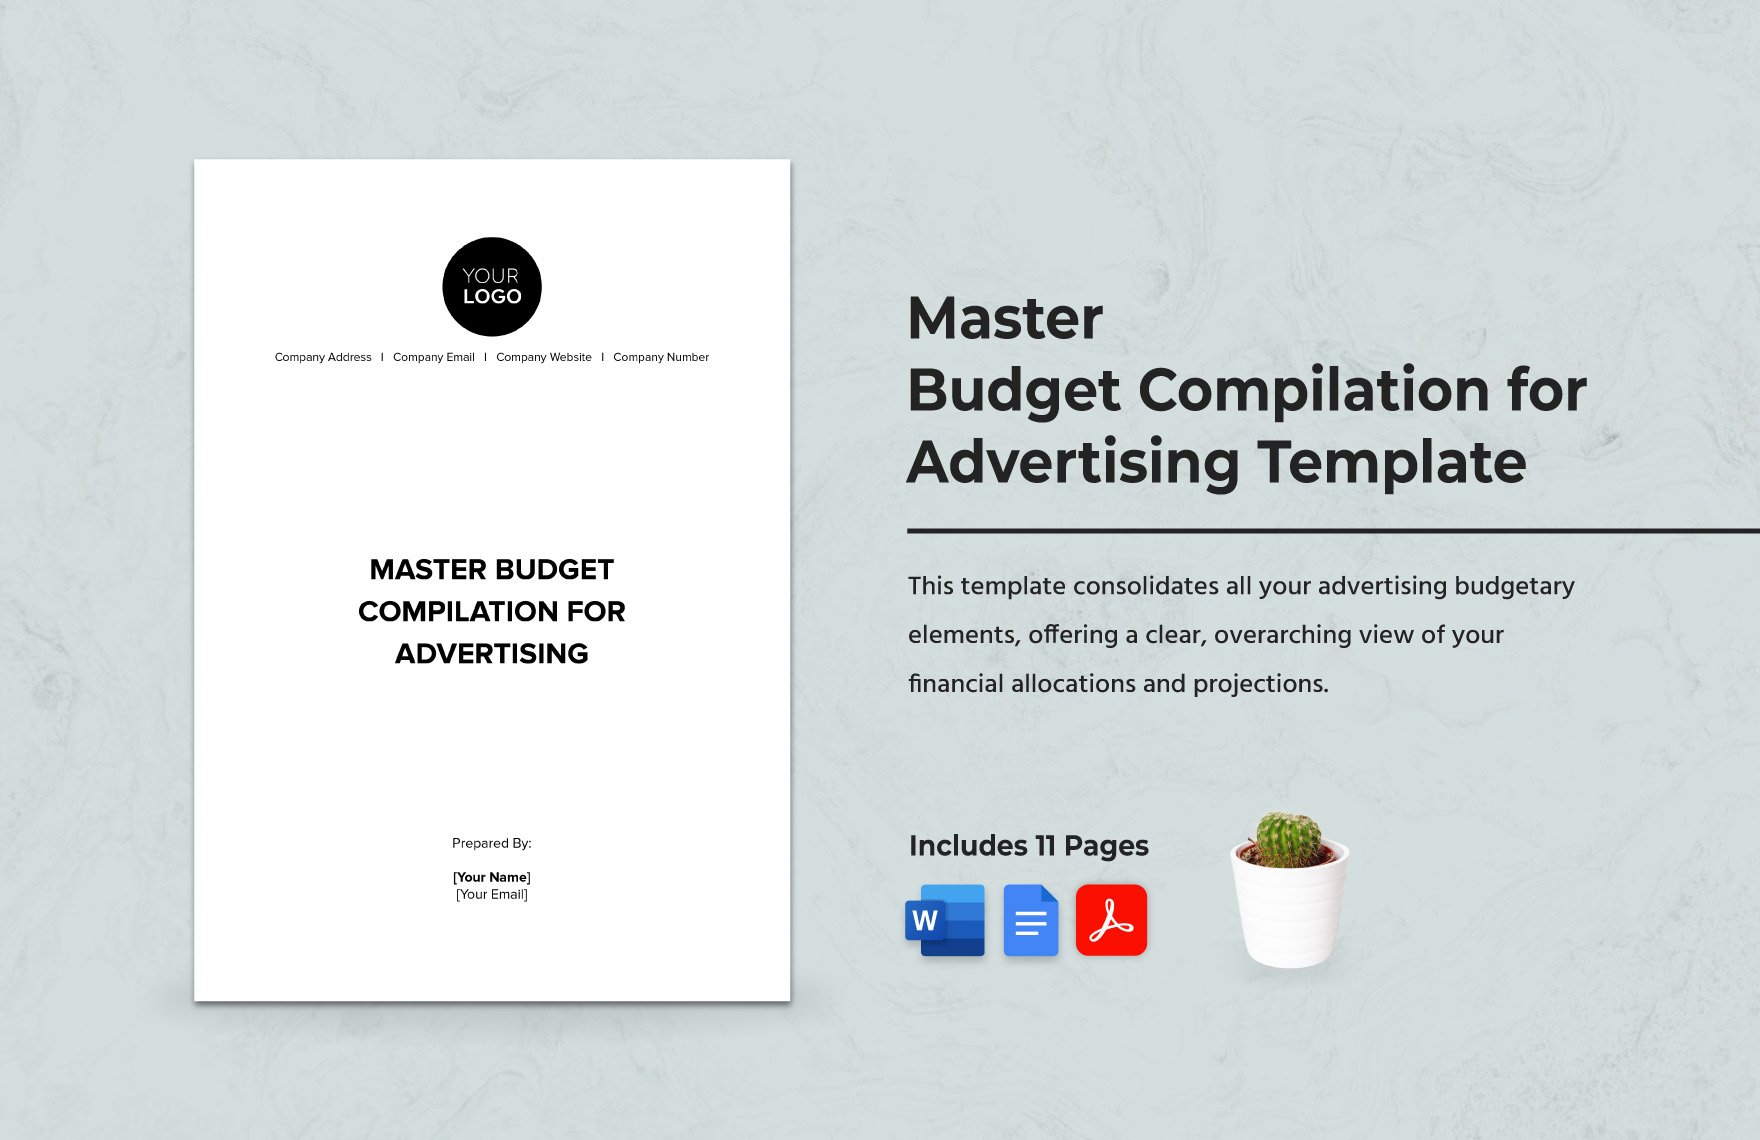 Master Budget Compilation for Advertising Template in Word, Google Docs, PDF